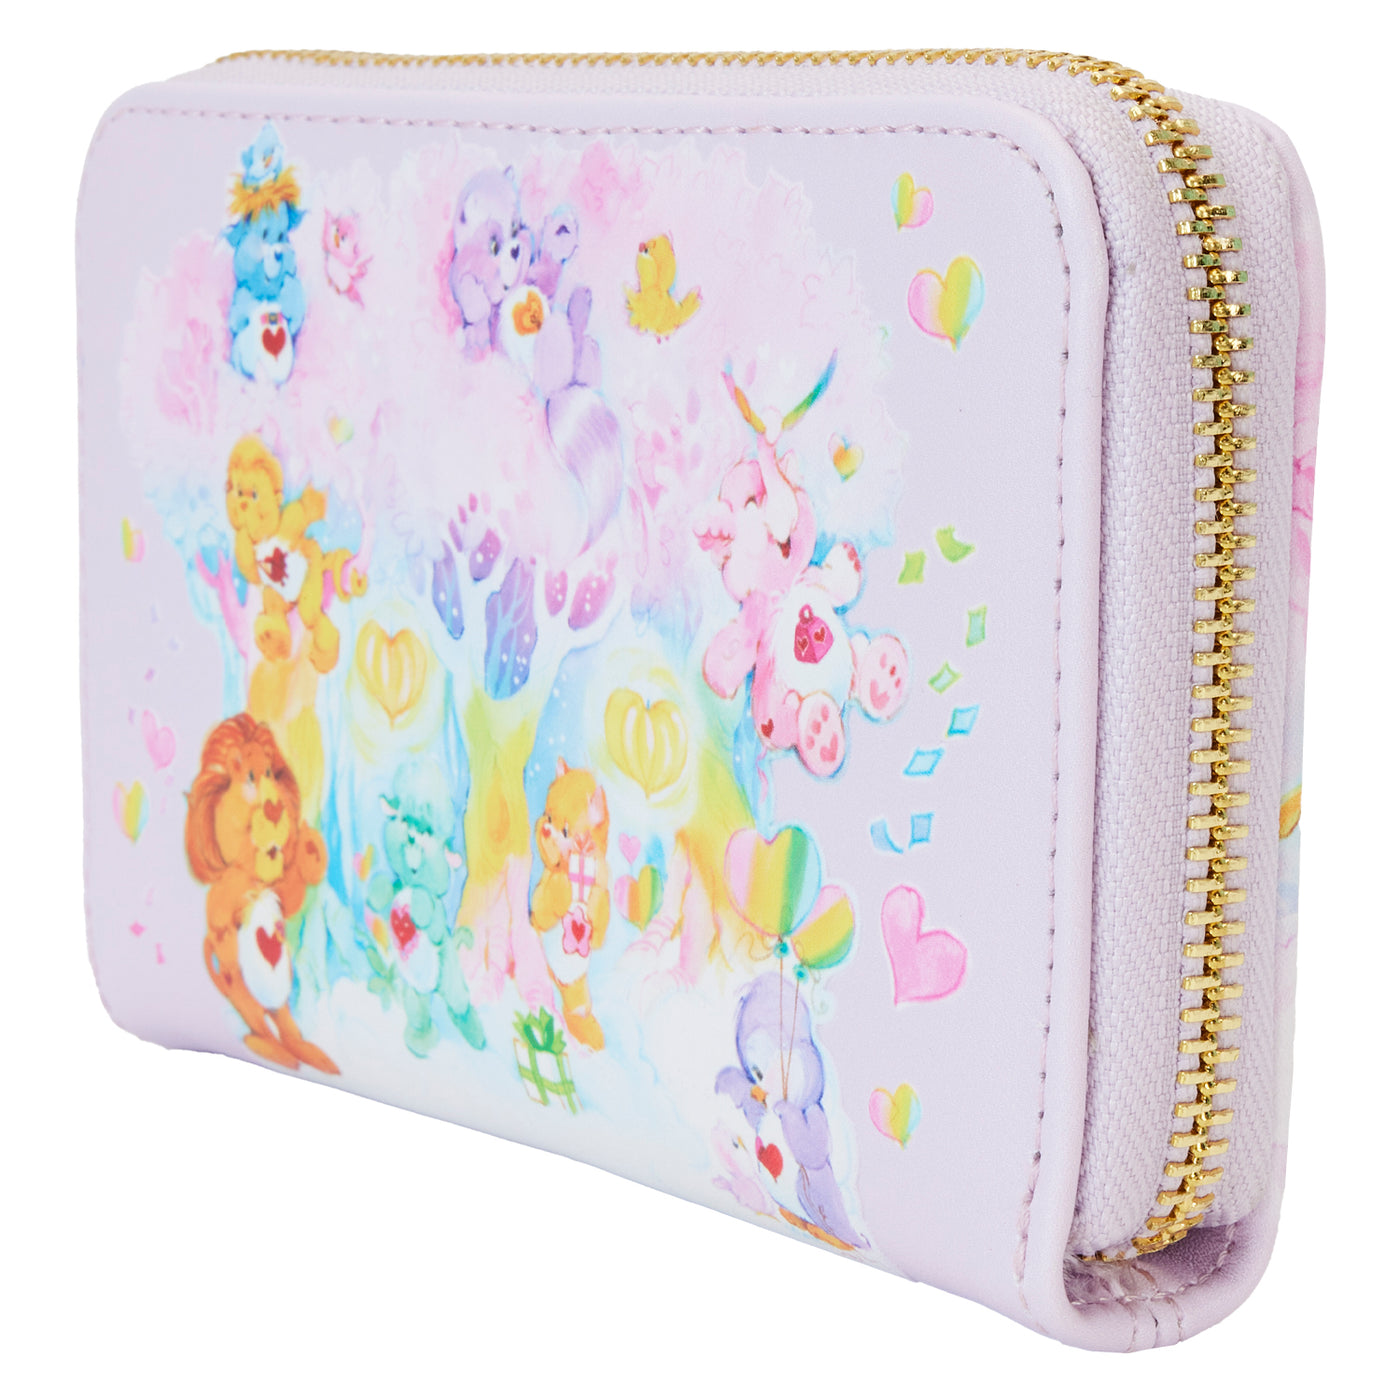 Loungefly Carebears Cousins Forest Fun Wallet